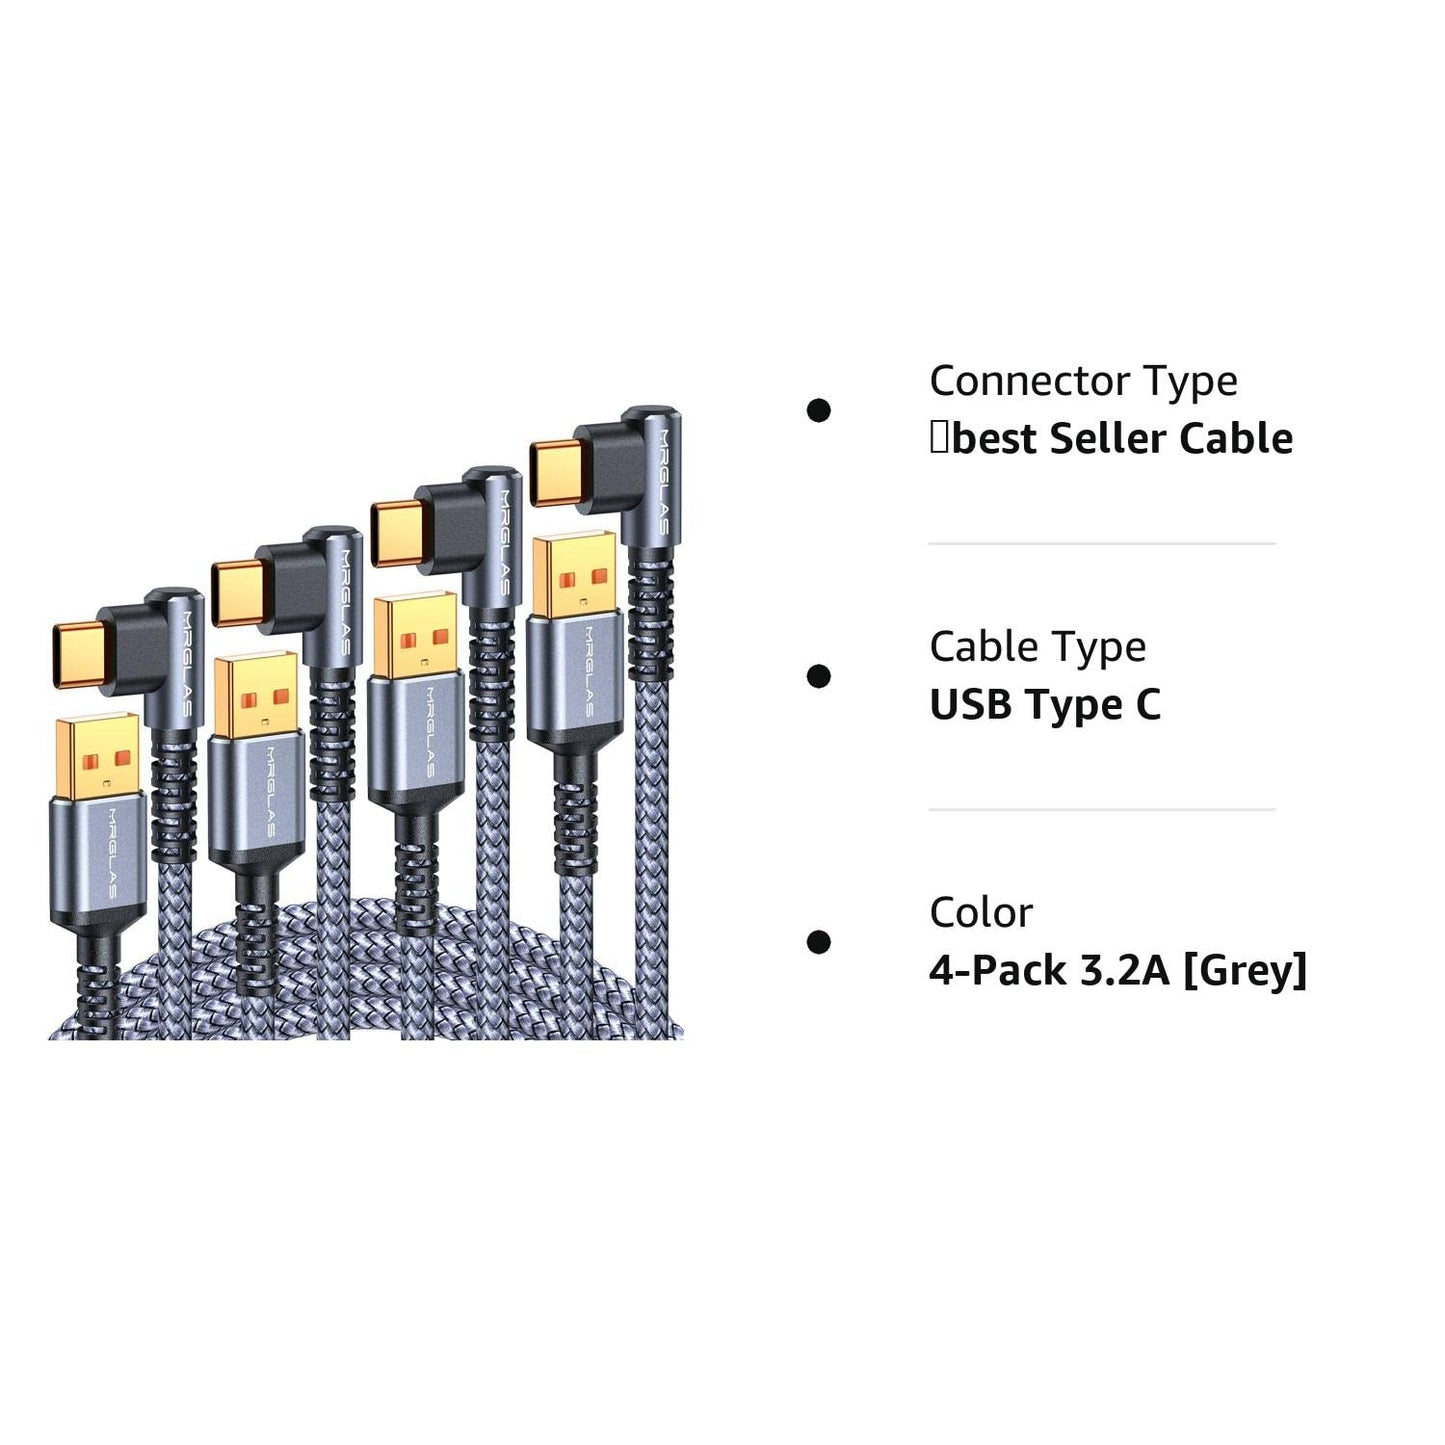 USB C Charger Cable 3.2A, [4-Pack,10+6.6+3.3+1.6FT] Type C Fast Charging Cable Right Angle [90°& Gold-Plated] Durable Nylon Braided USB A to USB C Cord for Samsung S10 S9 Note 8 S21 LG - Haassue